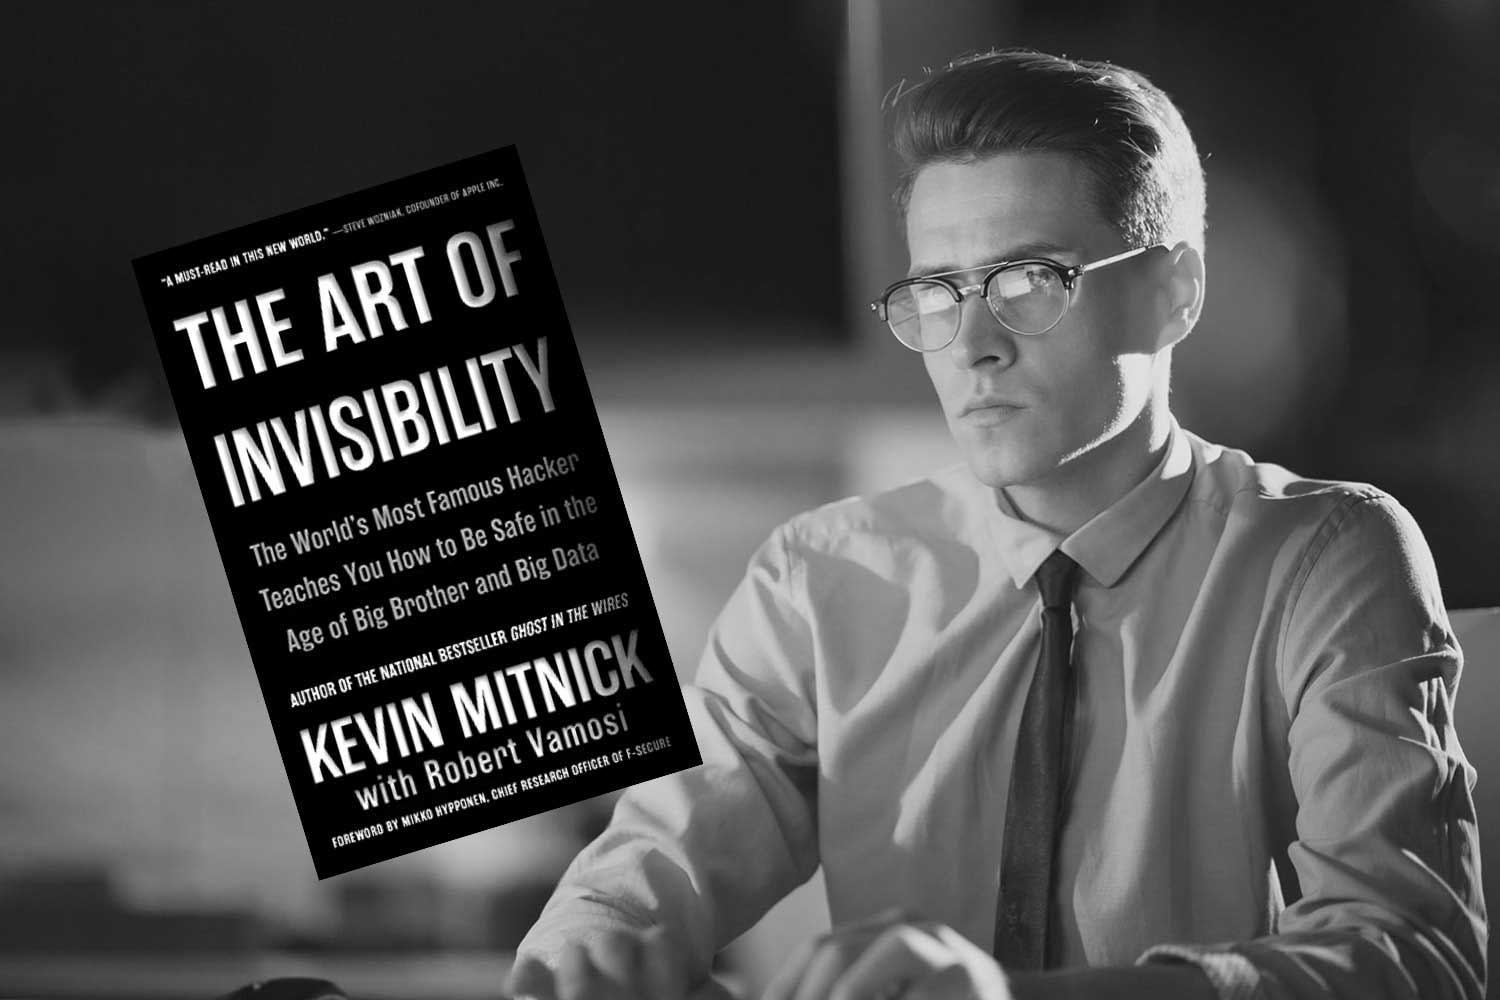  The Art of Invisibility: The World's Most Famous